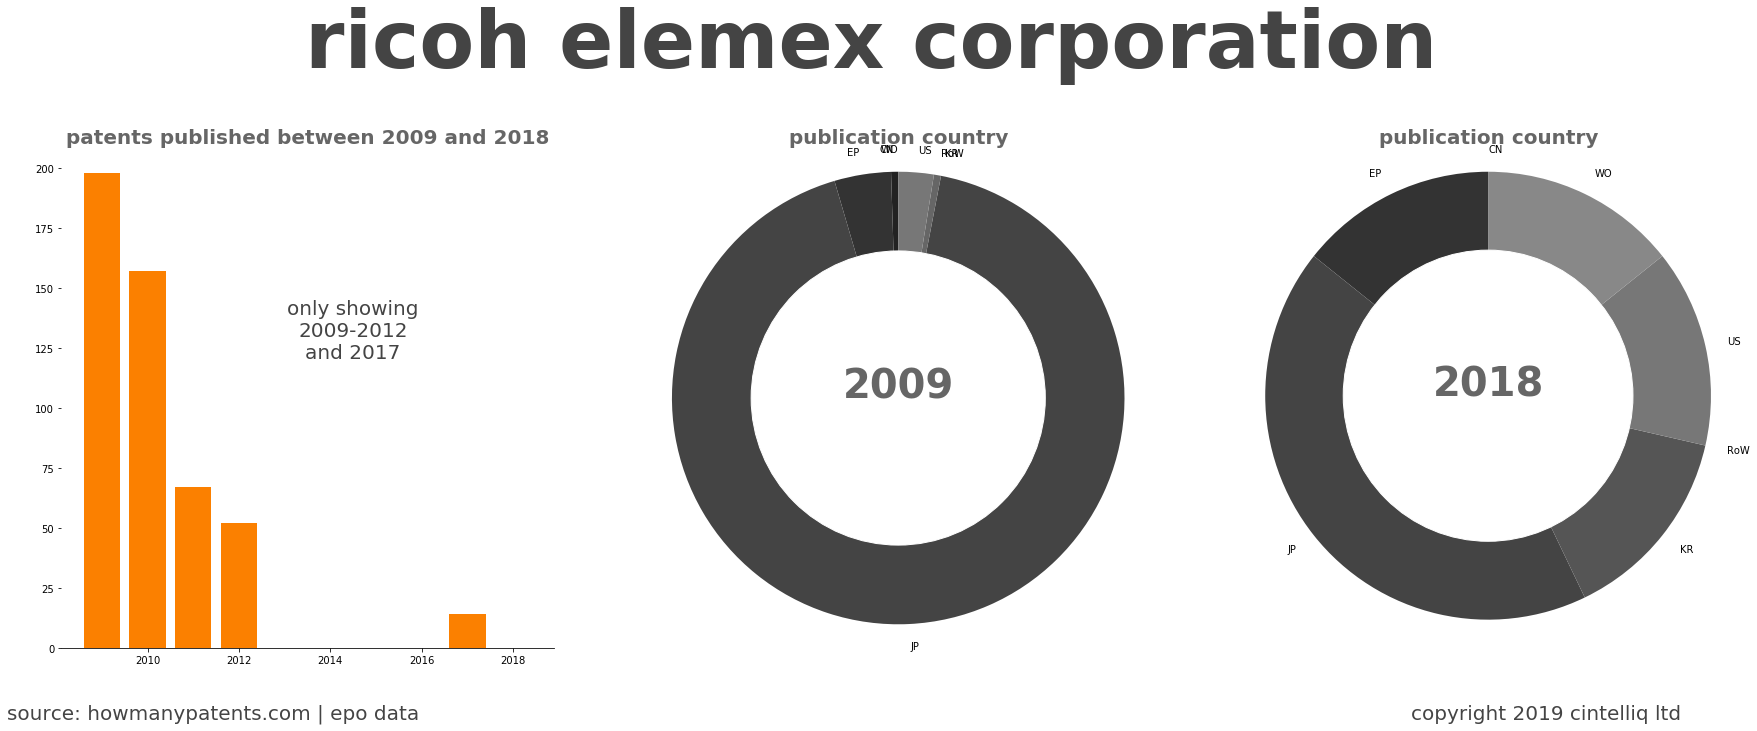 summary of patents for Ricoh Elemex Corporation